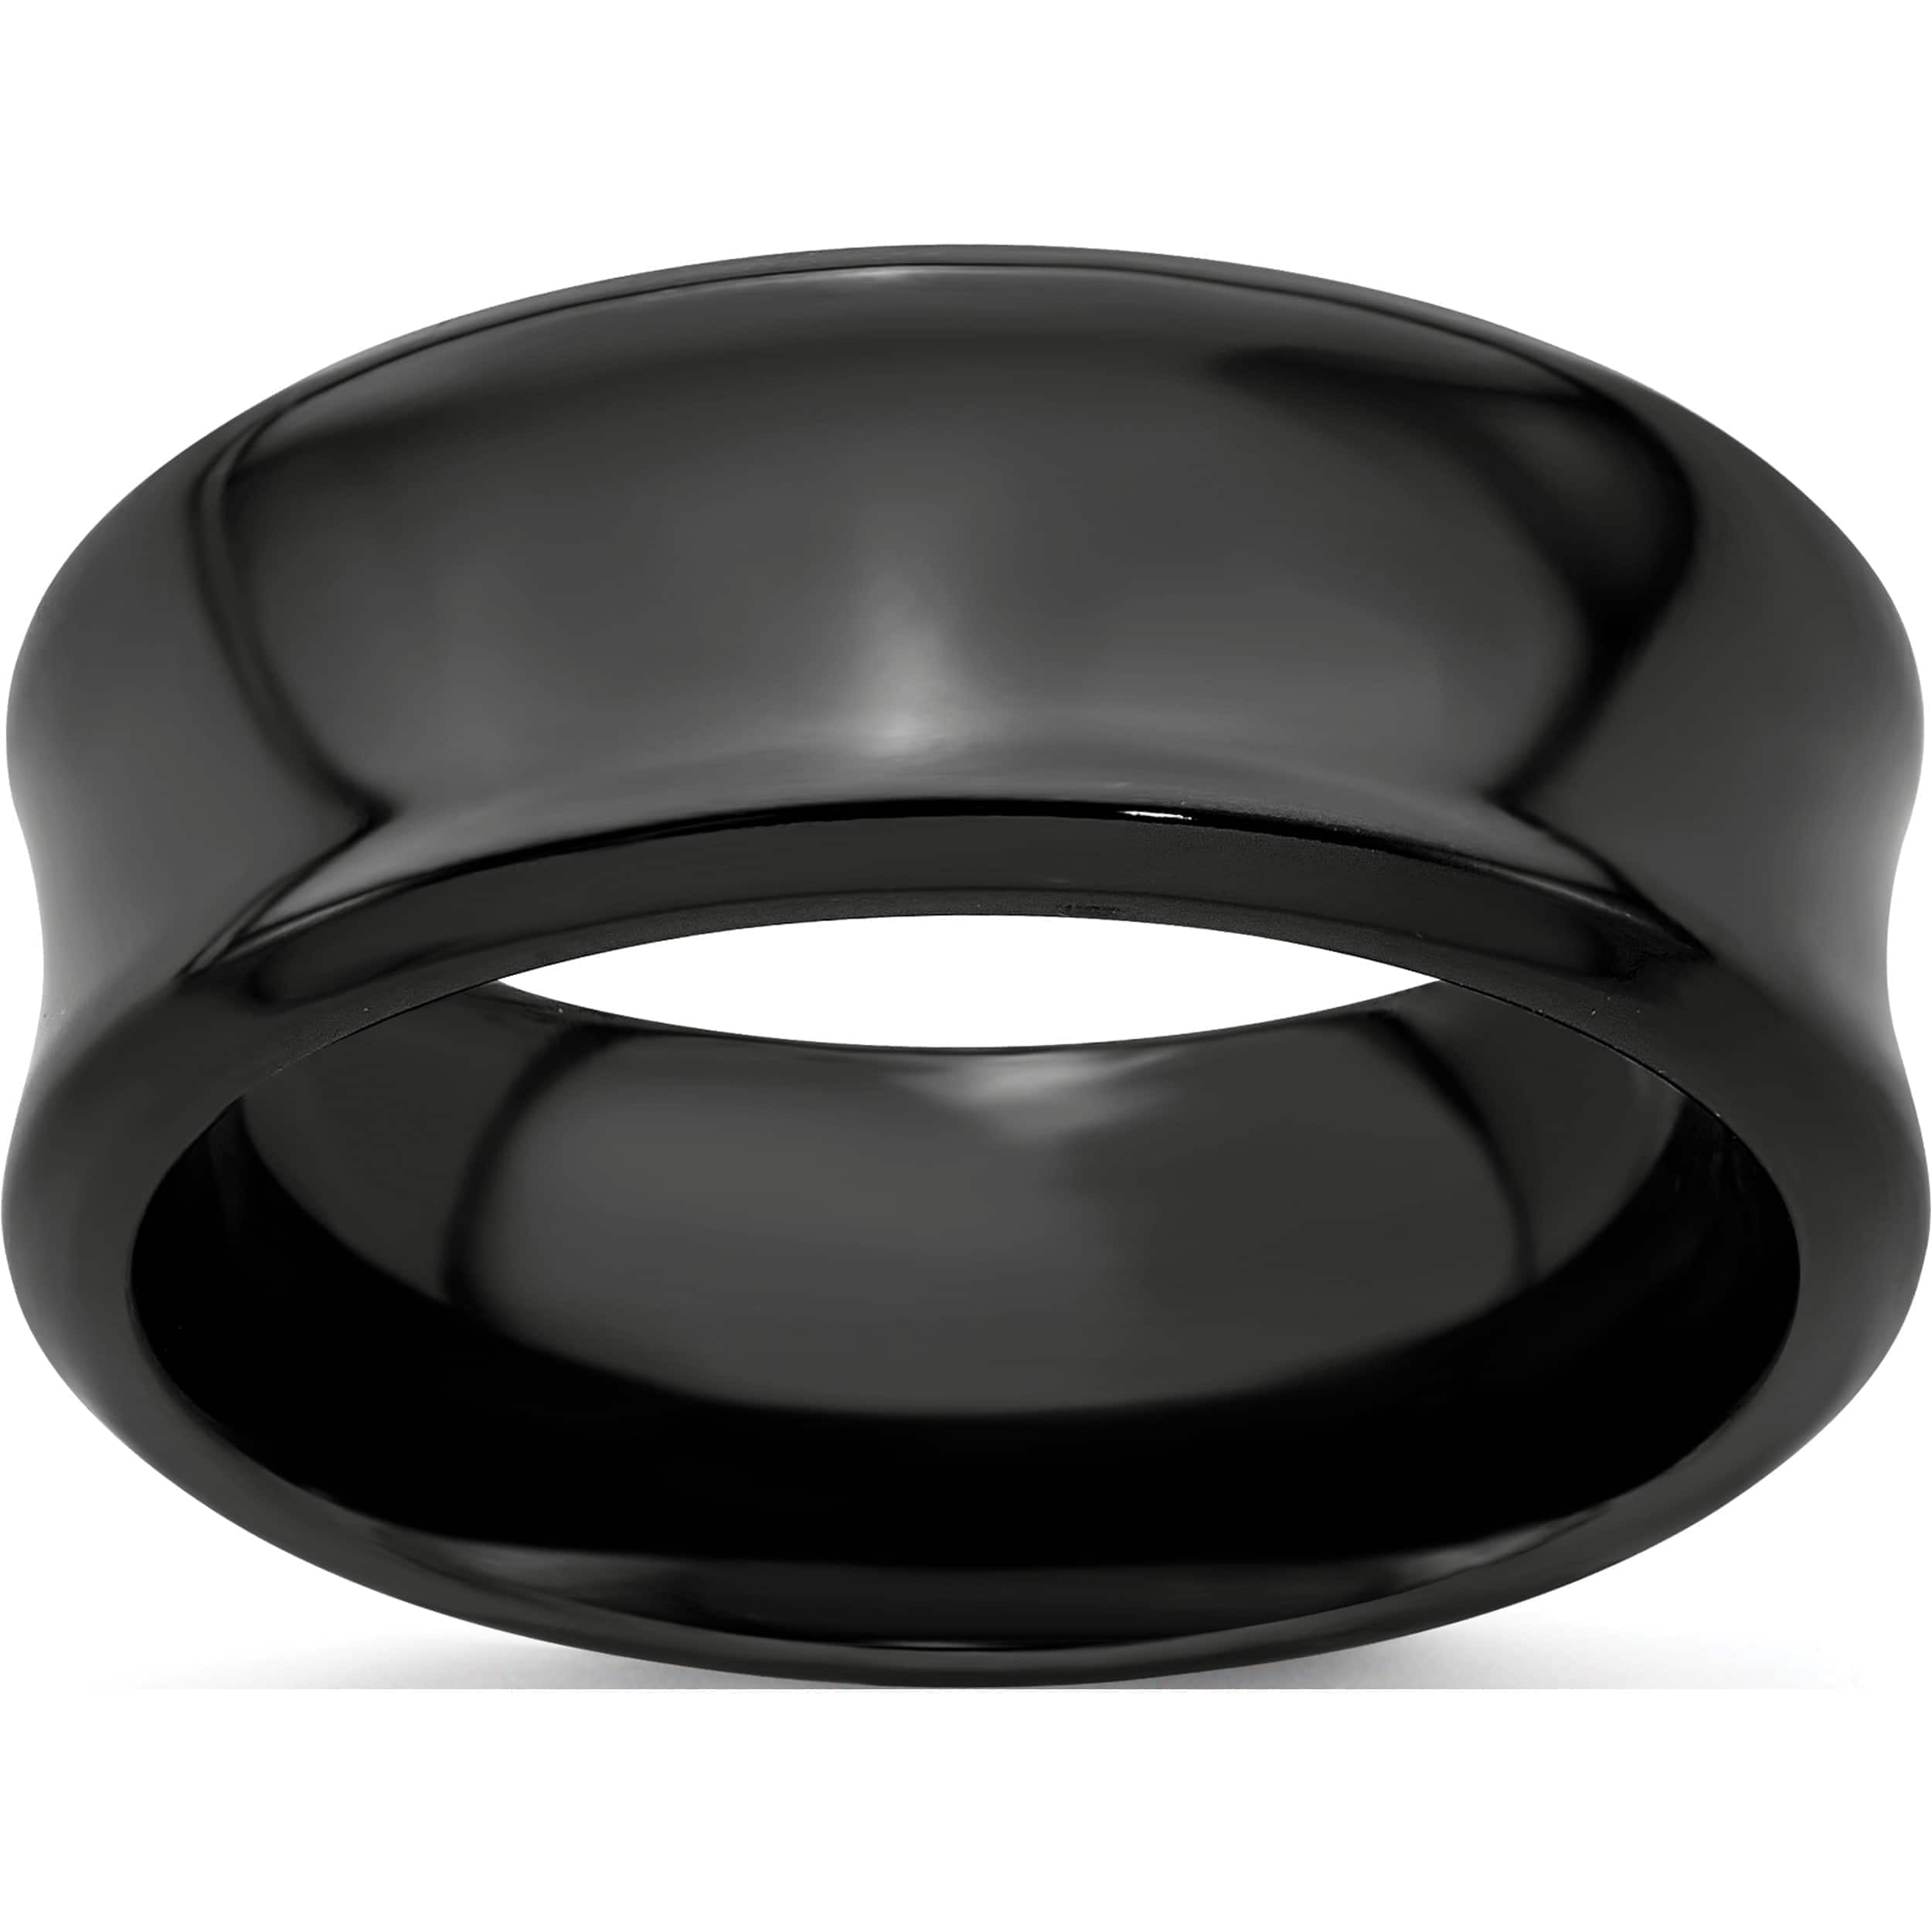 Bridal Wedding Bands Decorative Bands Edward Mirell Black Ti and Titanium Polished Grooved Concave Ring Size 9